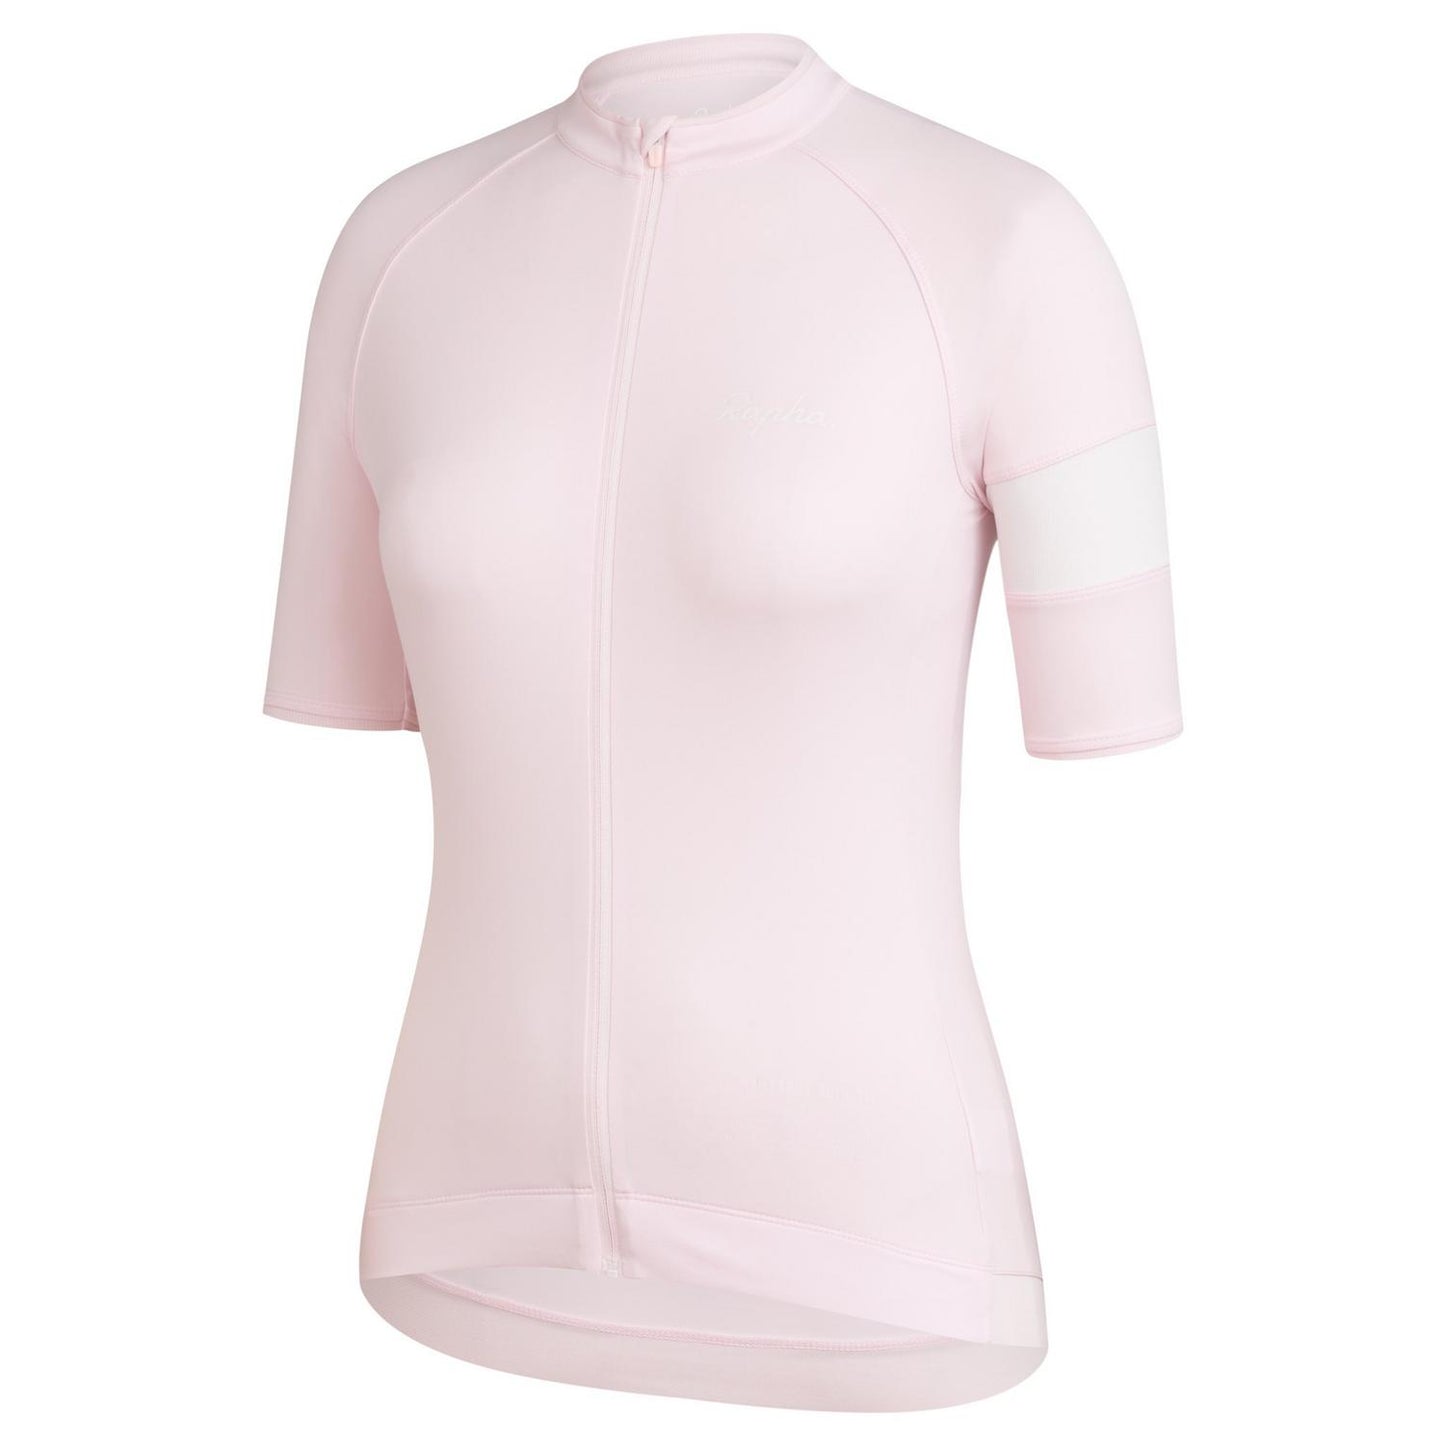 RAPHA Core Women Jersey - BSW Pale Pink/White